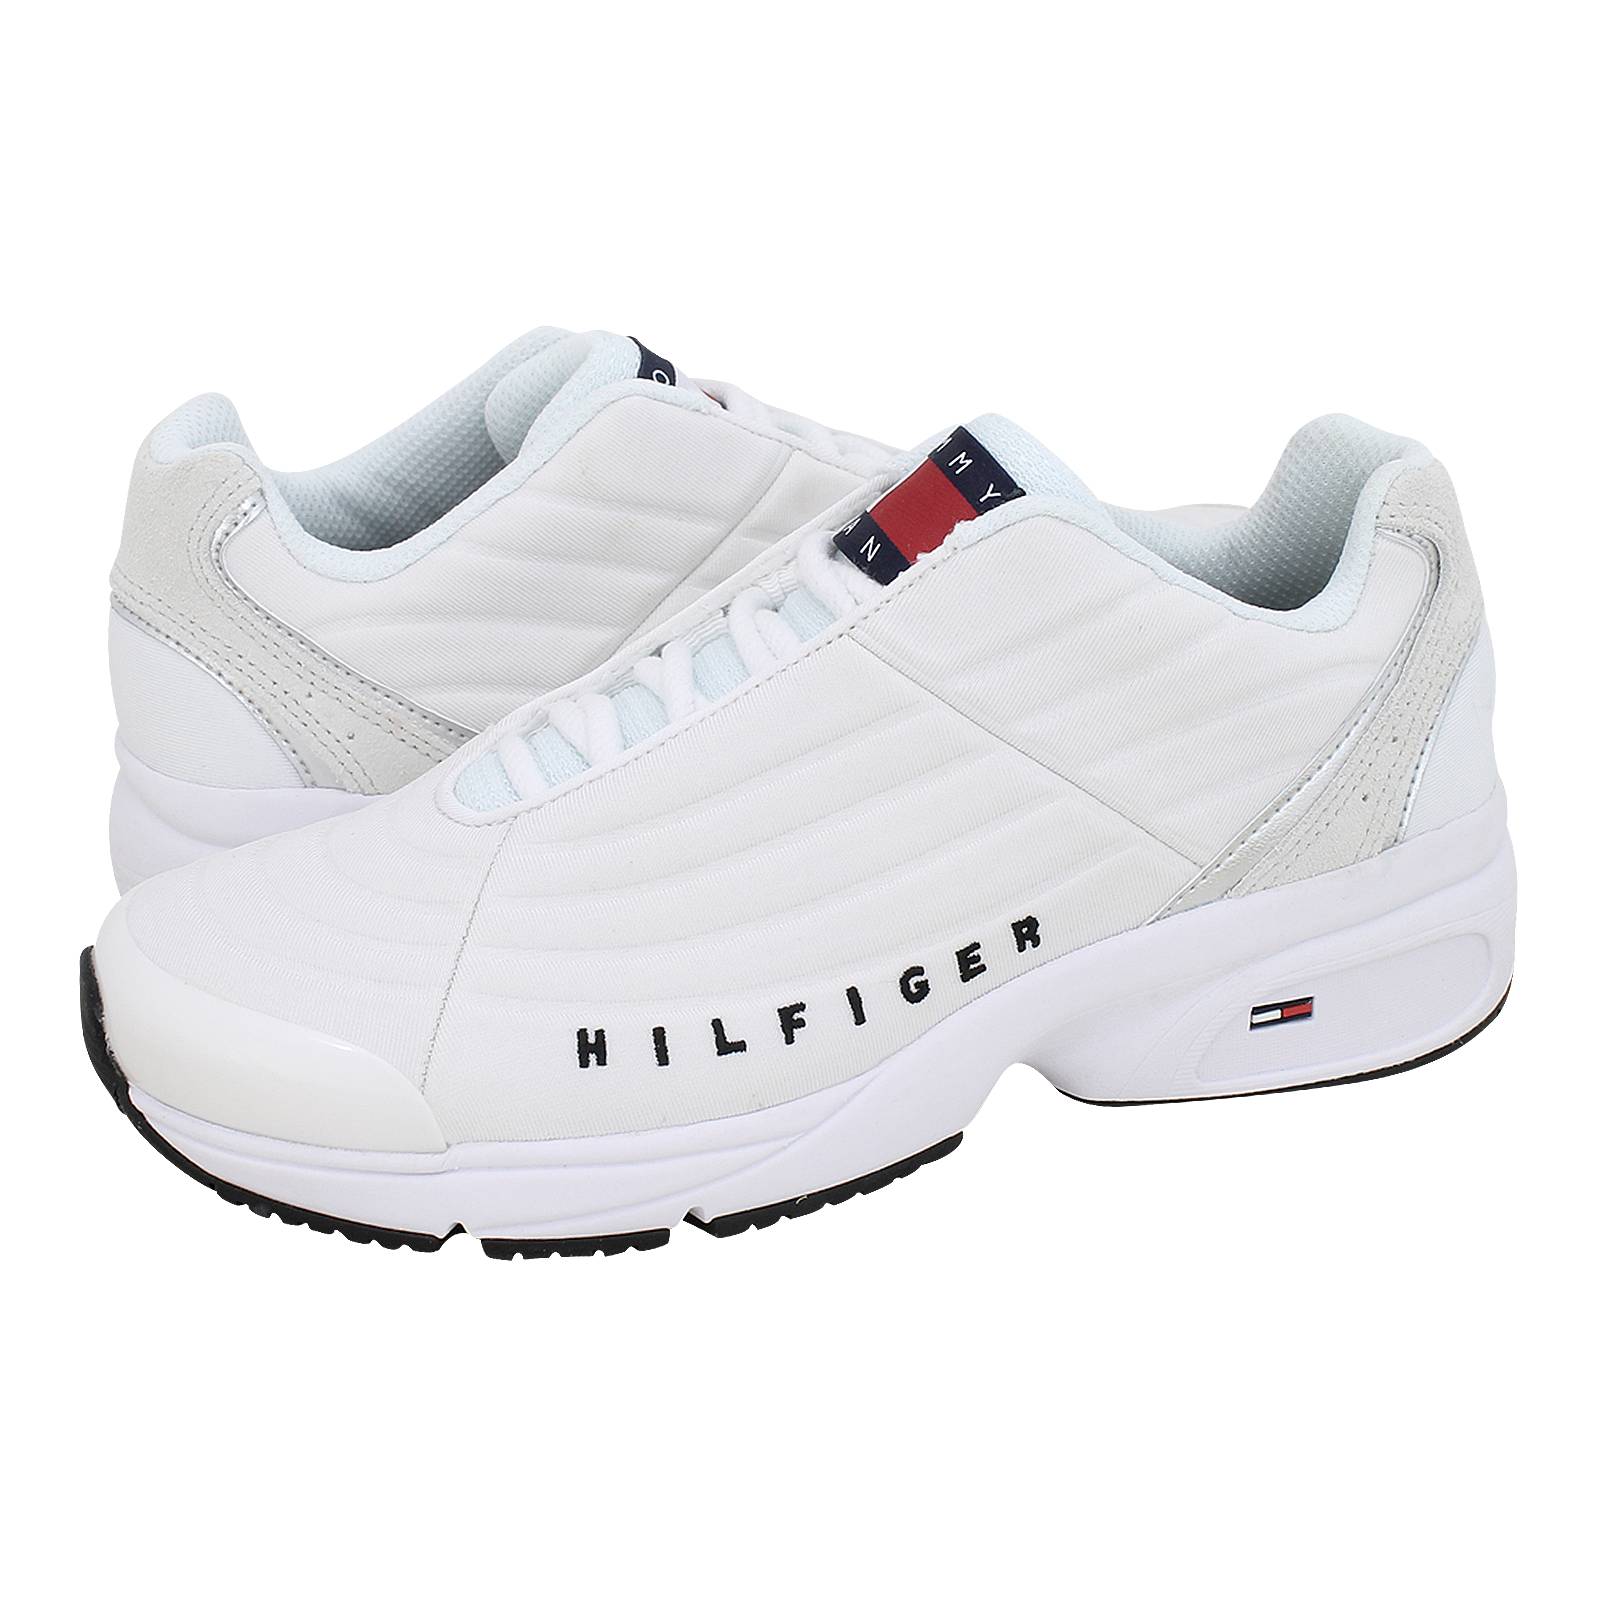 tommy hilfiger women's casual shoes